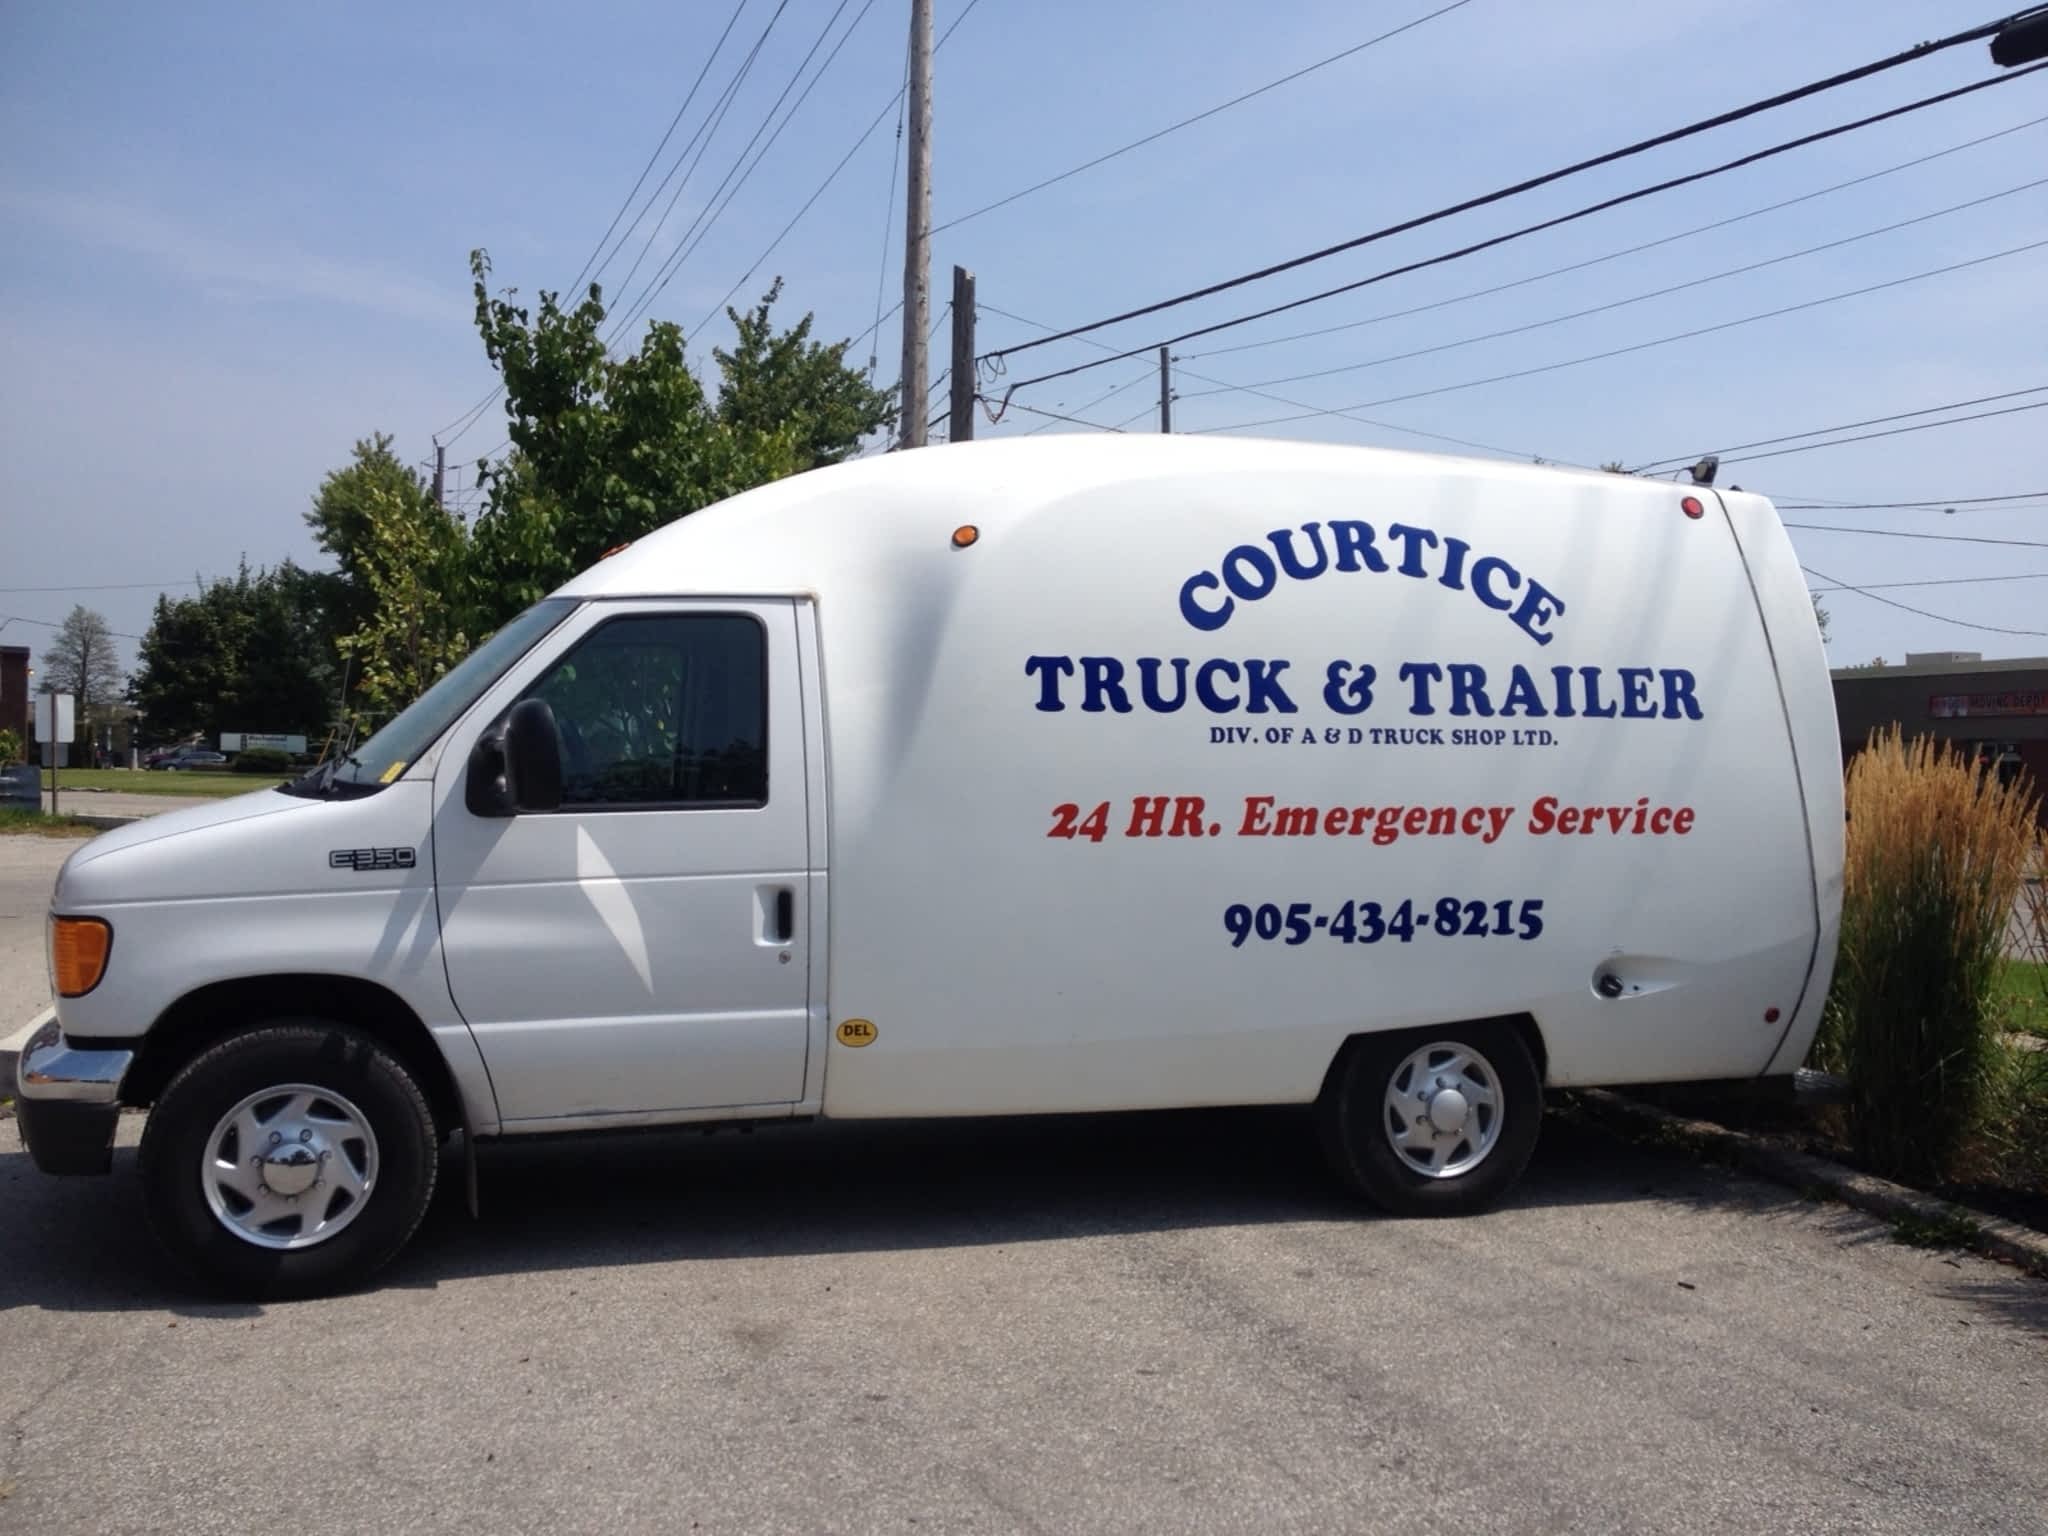 photo Courtice Truck & Trailer